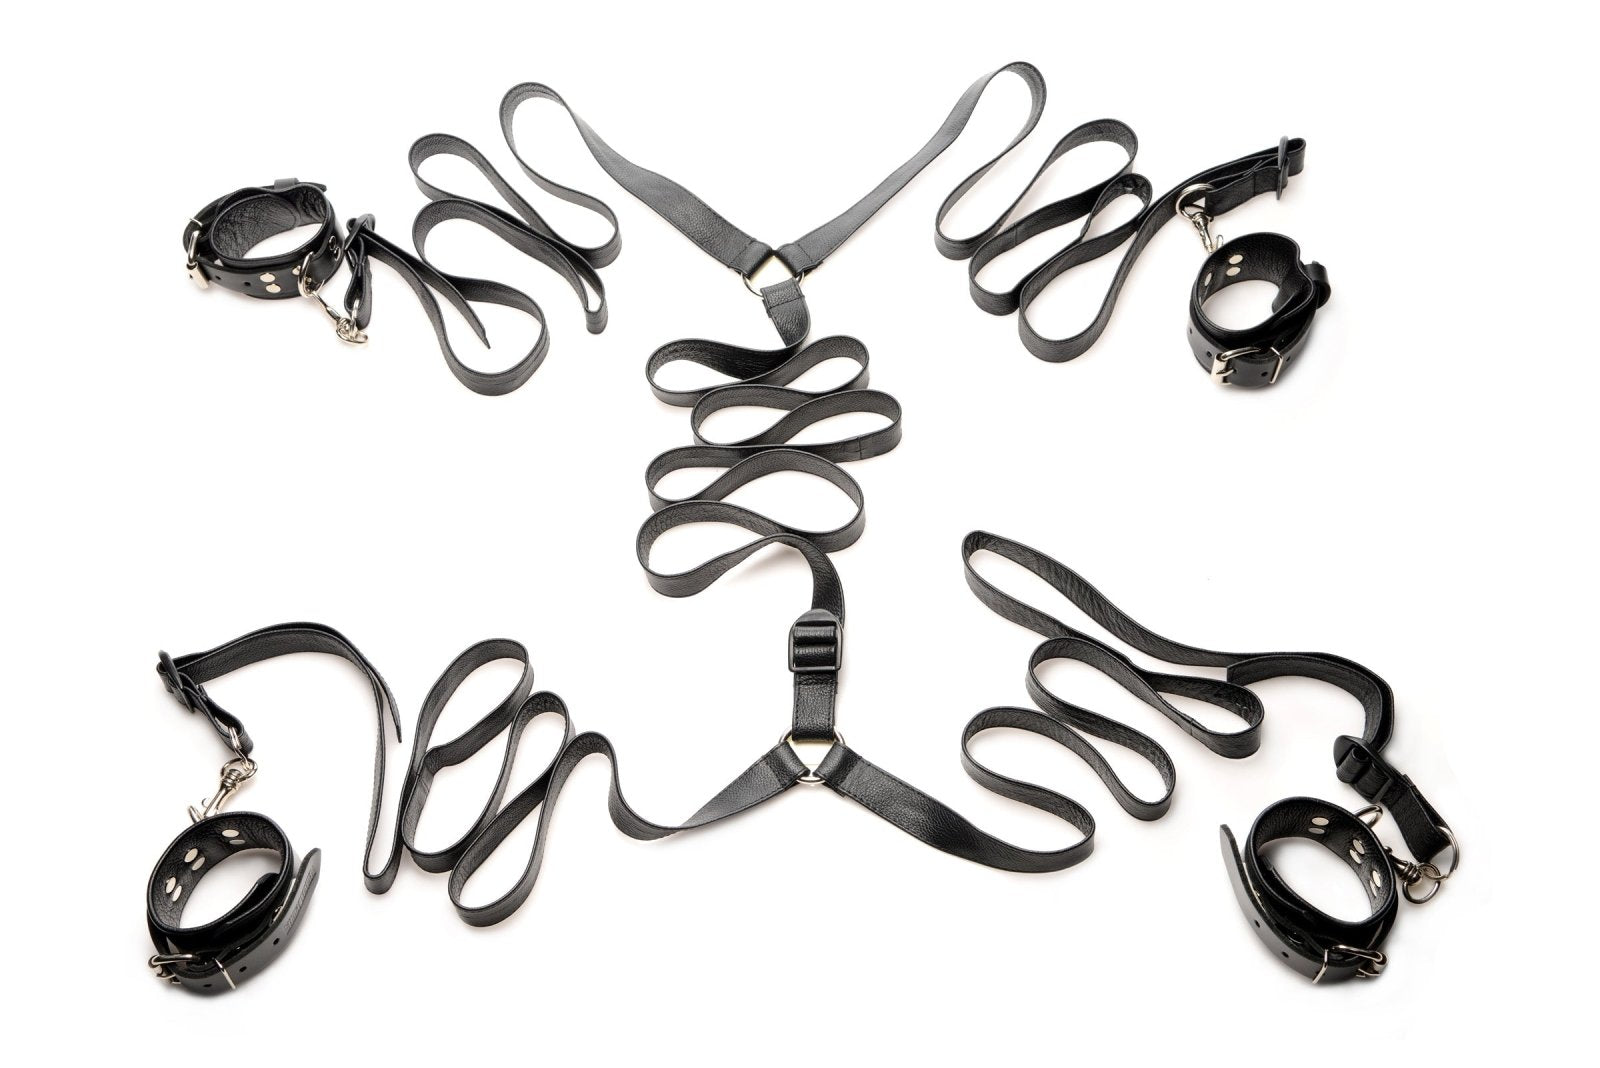 Leather Bed Restraint Kit - Kink Store